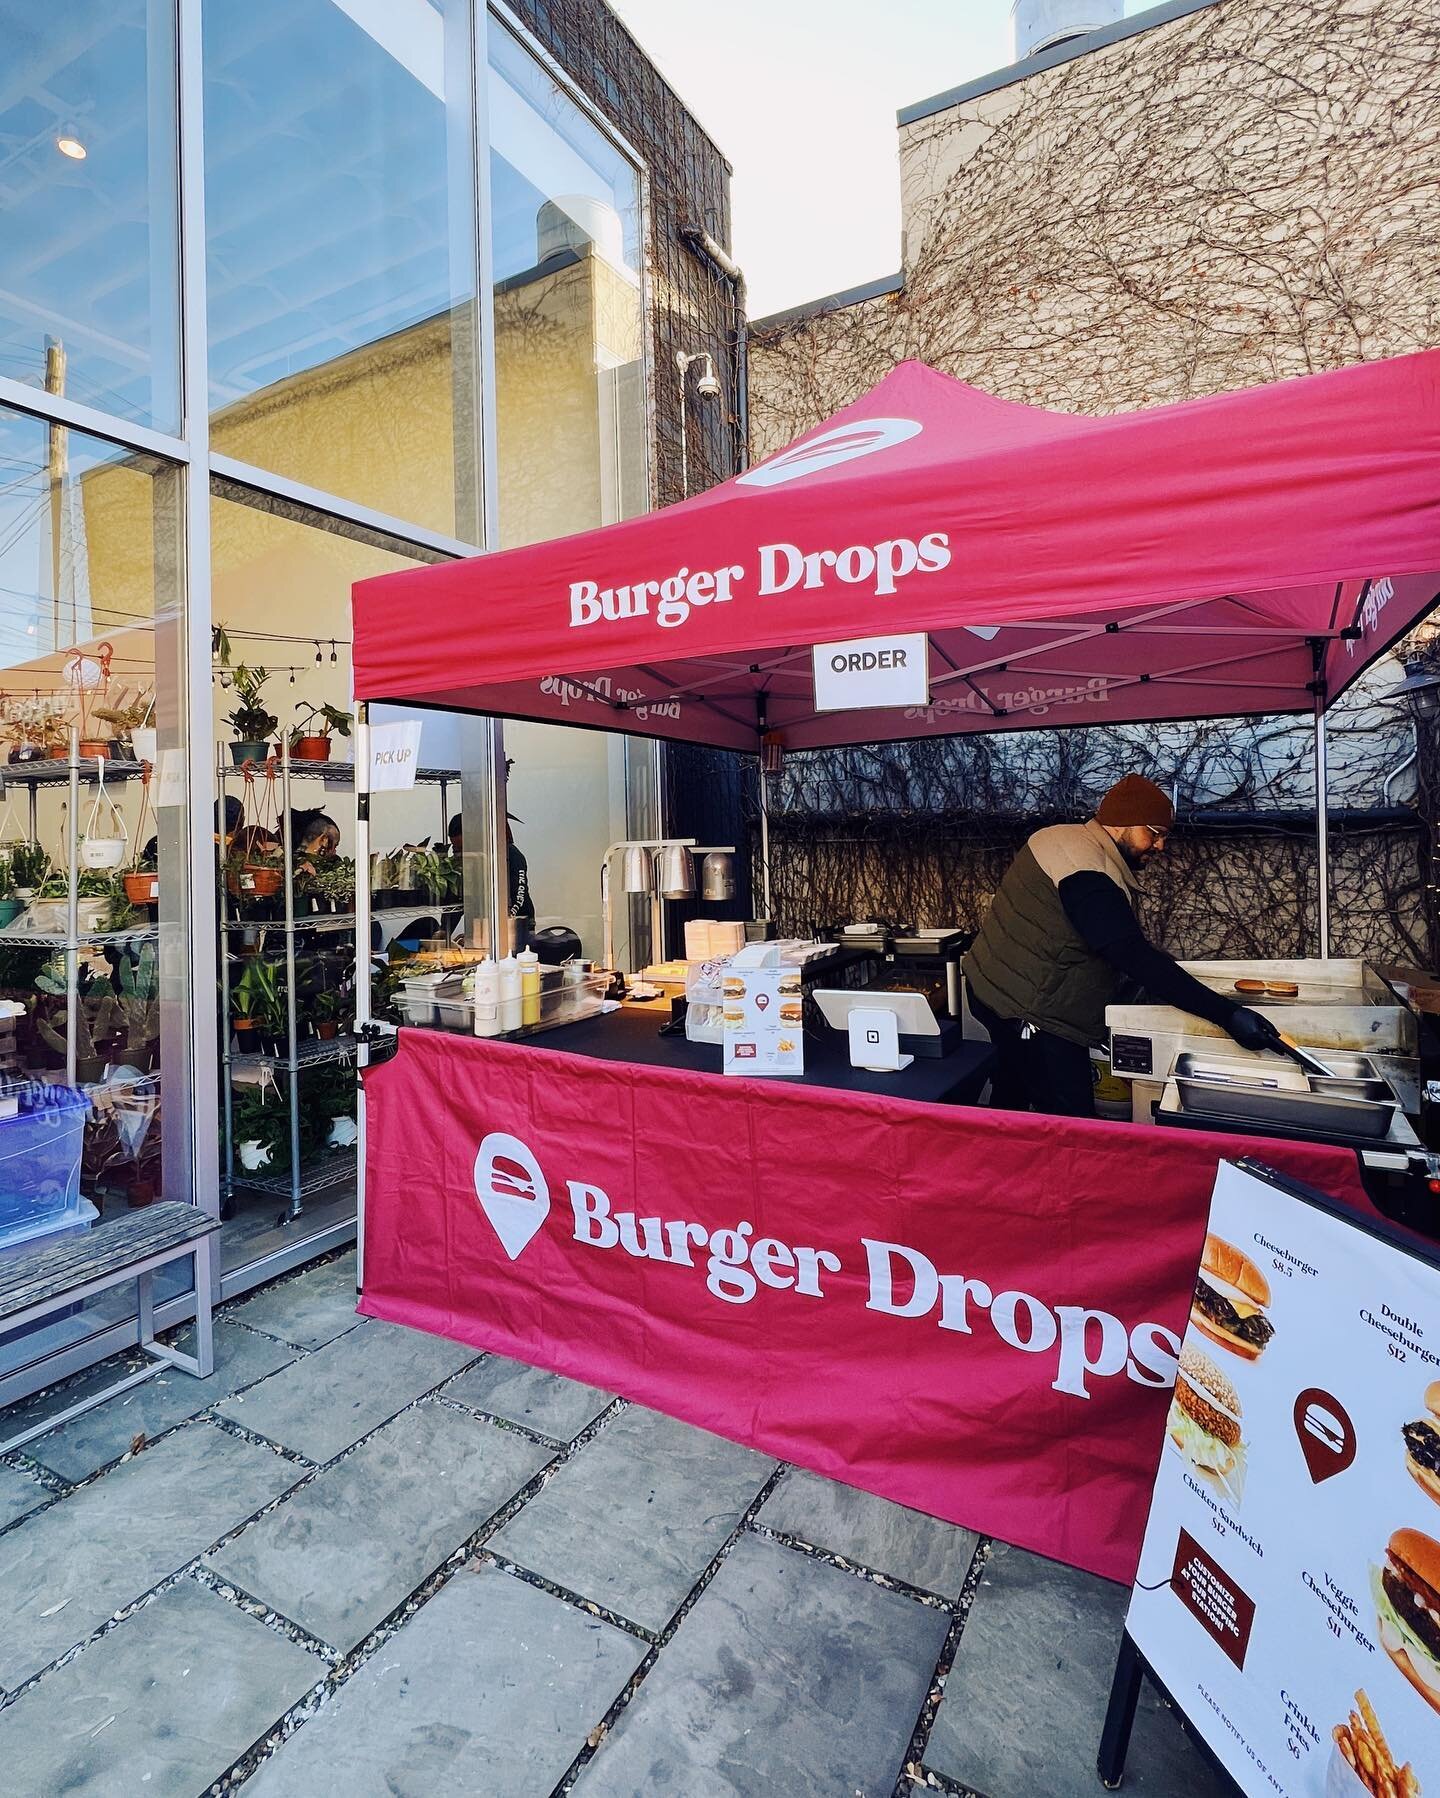 📍Dropping in on our friends @album.studios for their Holiday Market today and Sunday! Come say Hi and #shopsmall with +20 Toronto vendors 🛍 #burgerdrops #peaceandburgers